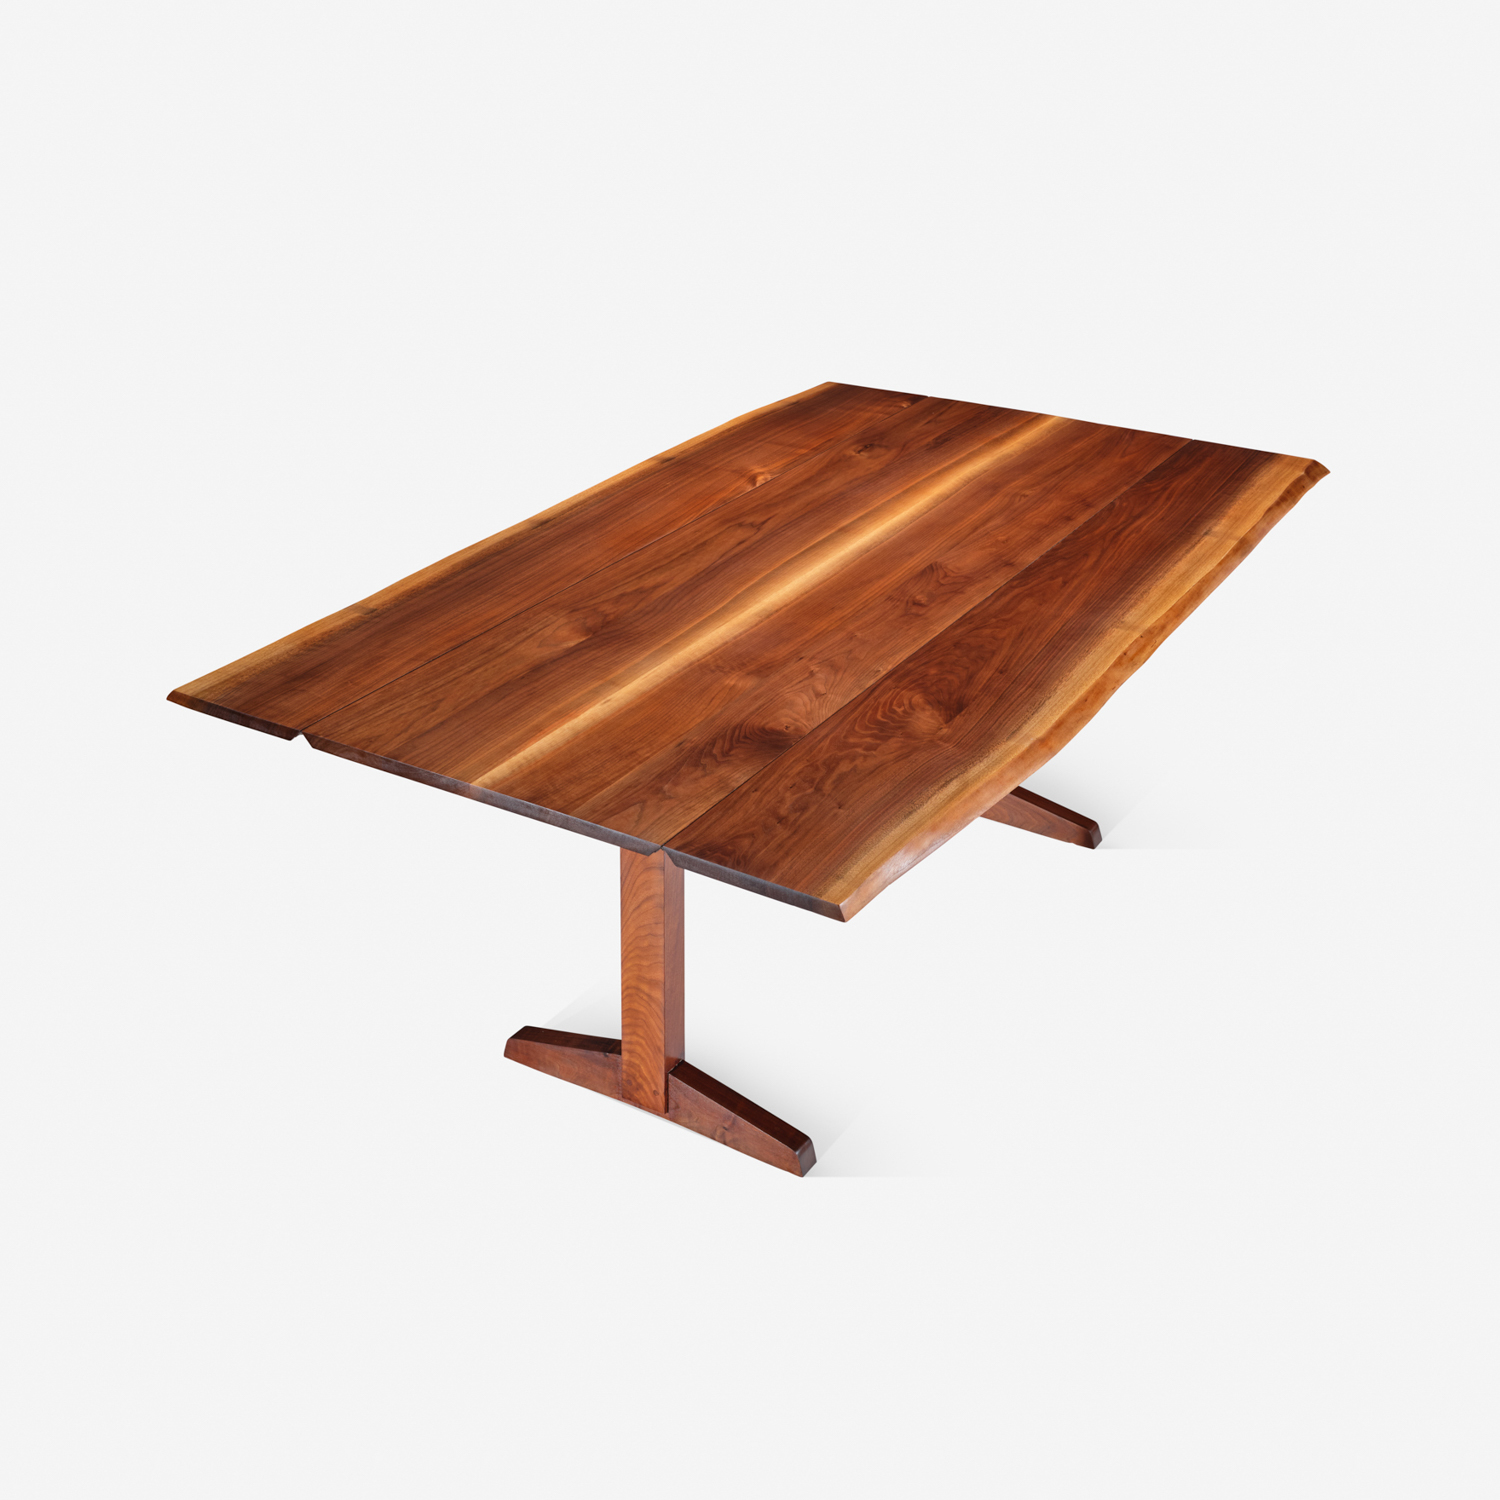 Special Harvest Table by George Nakashima – 1962 (9)